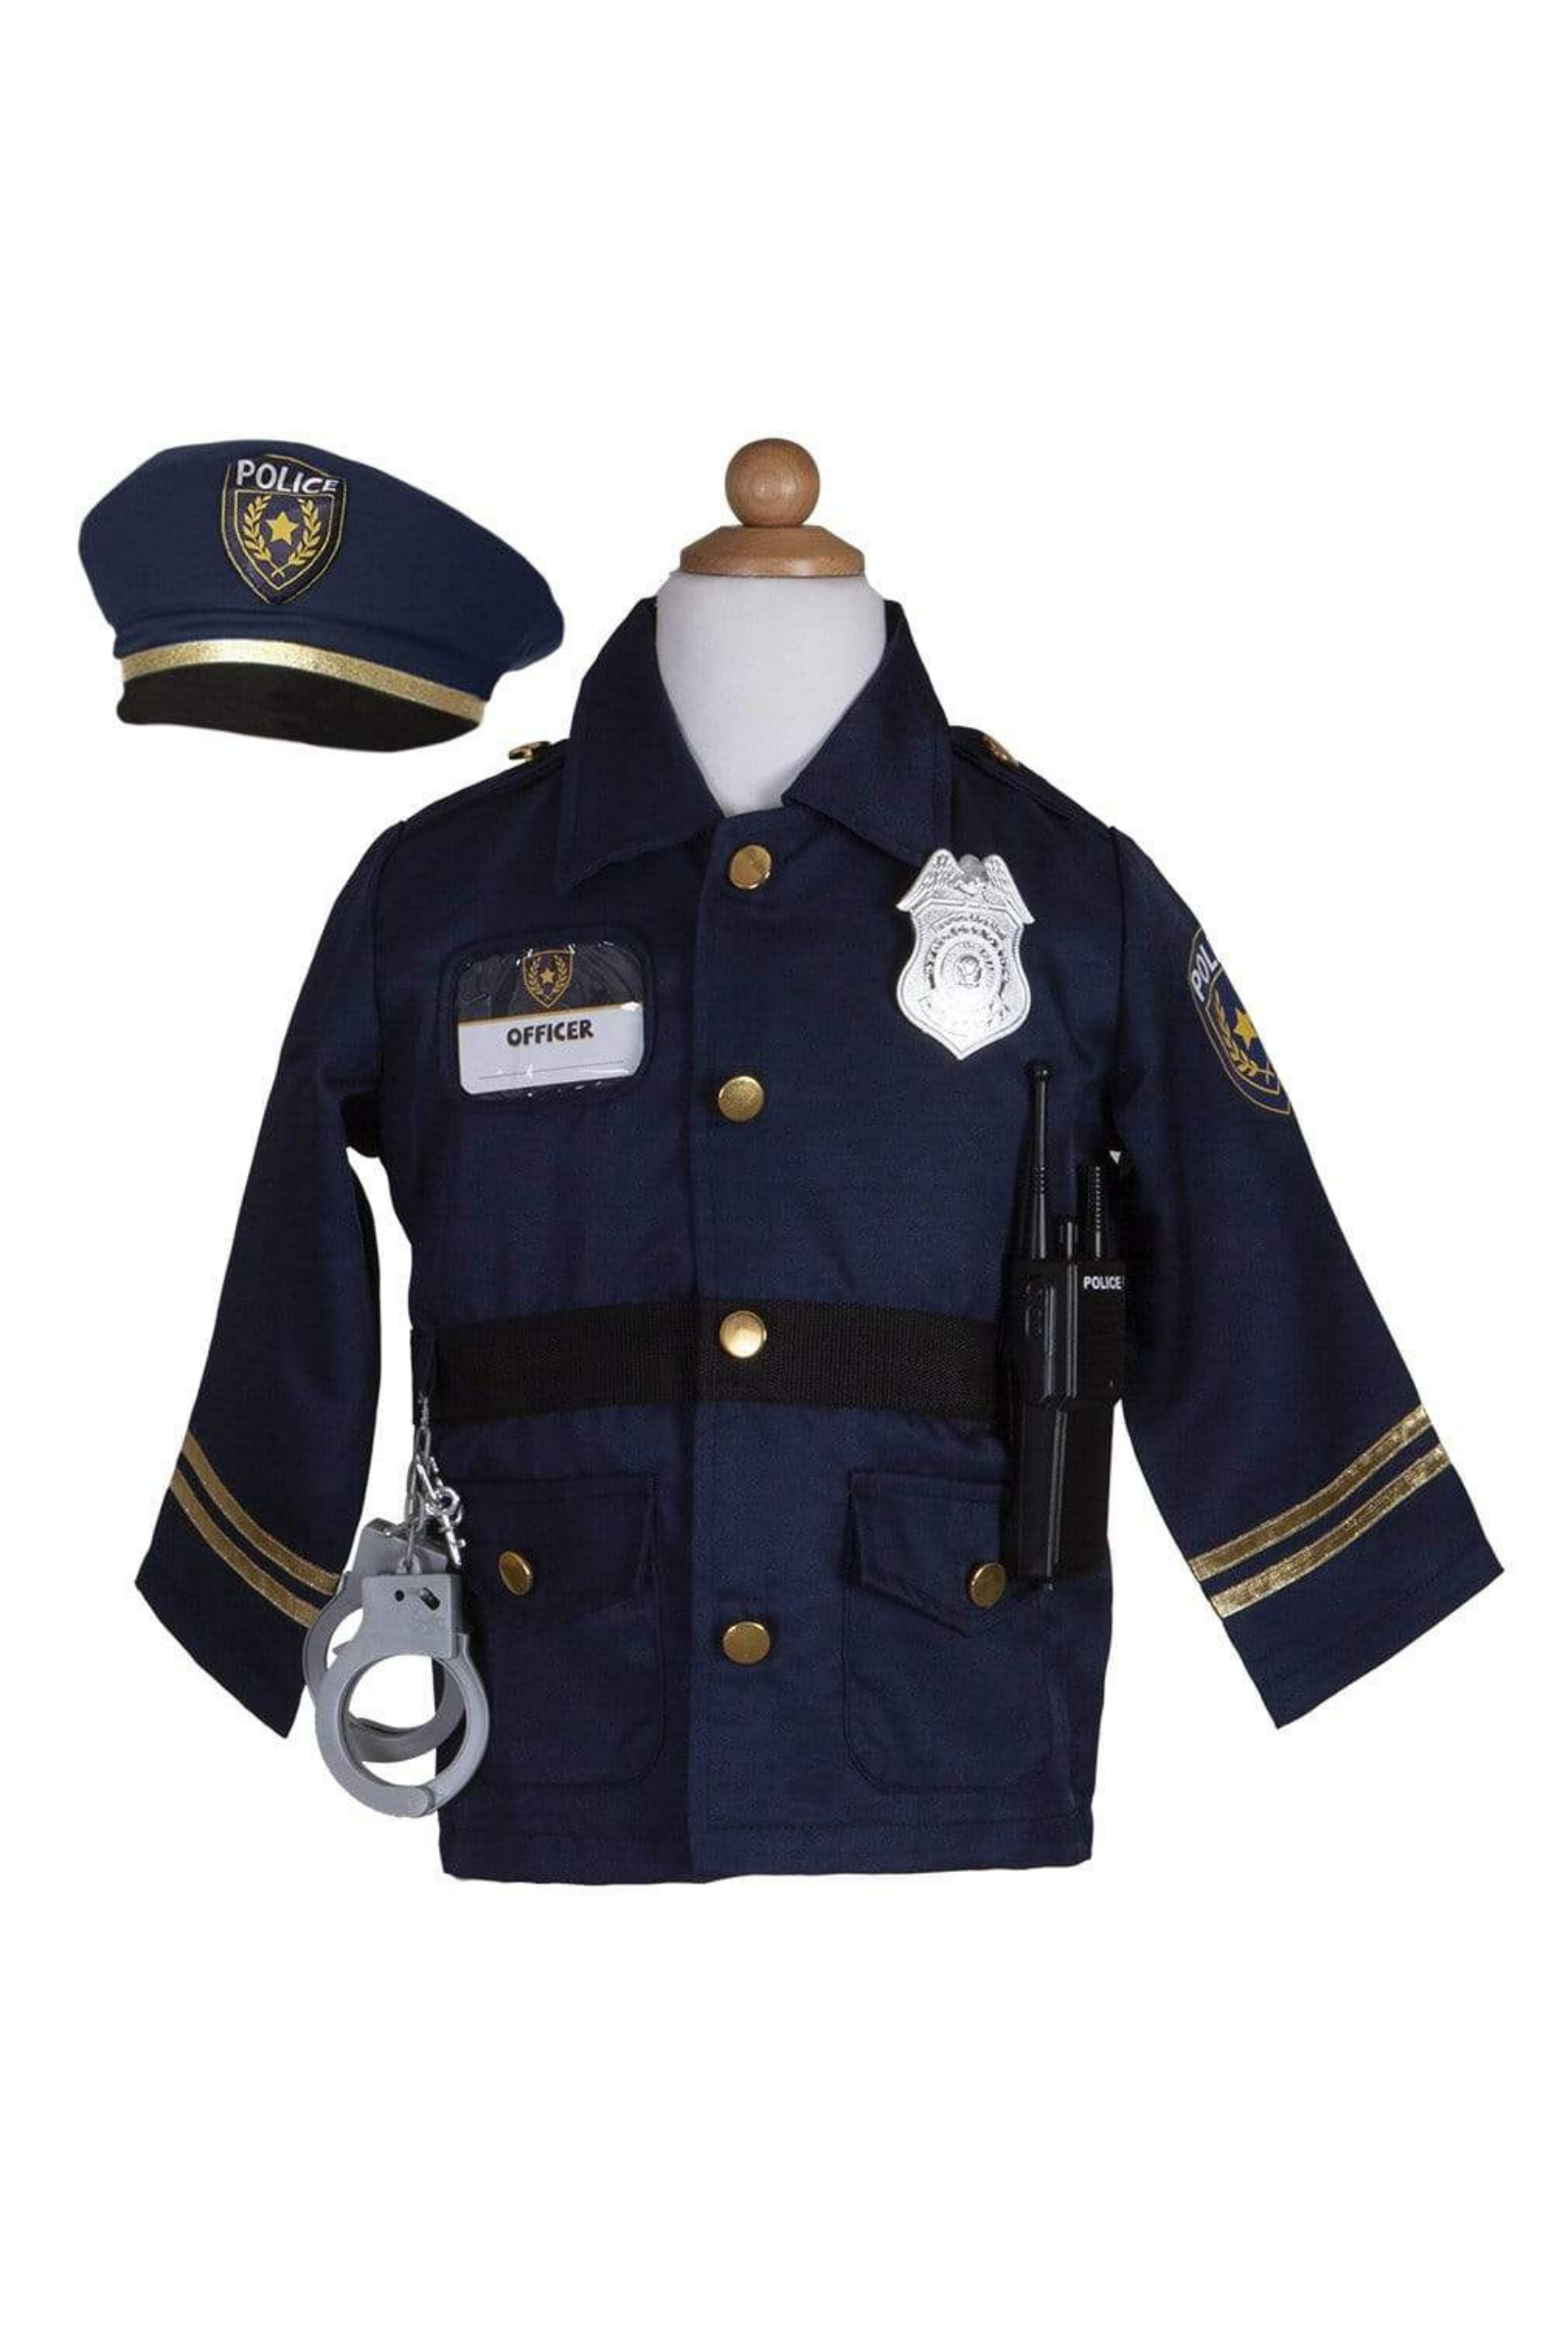 Gifts For Cops - Shop on Pinterest